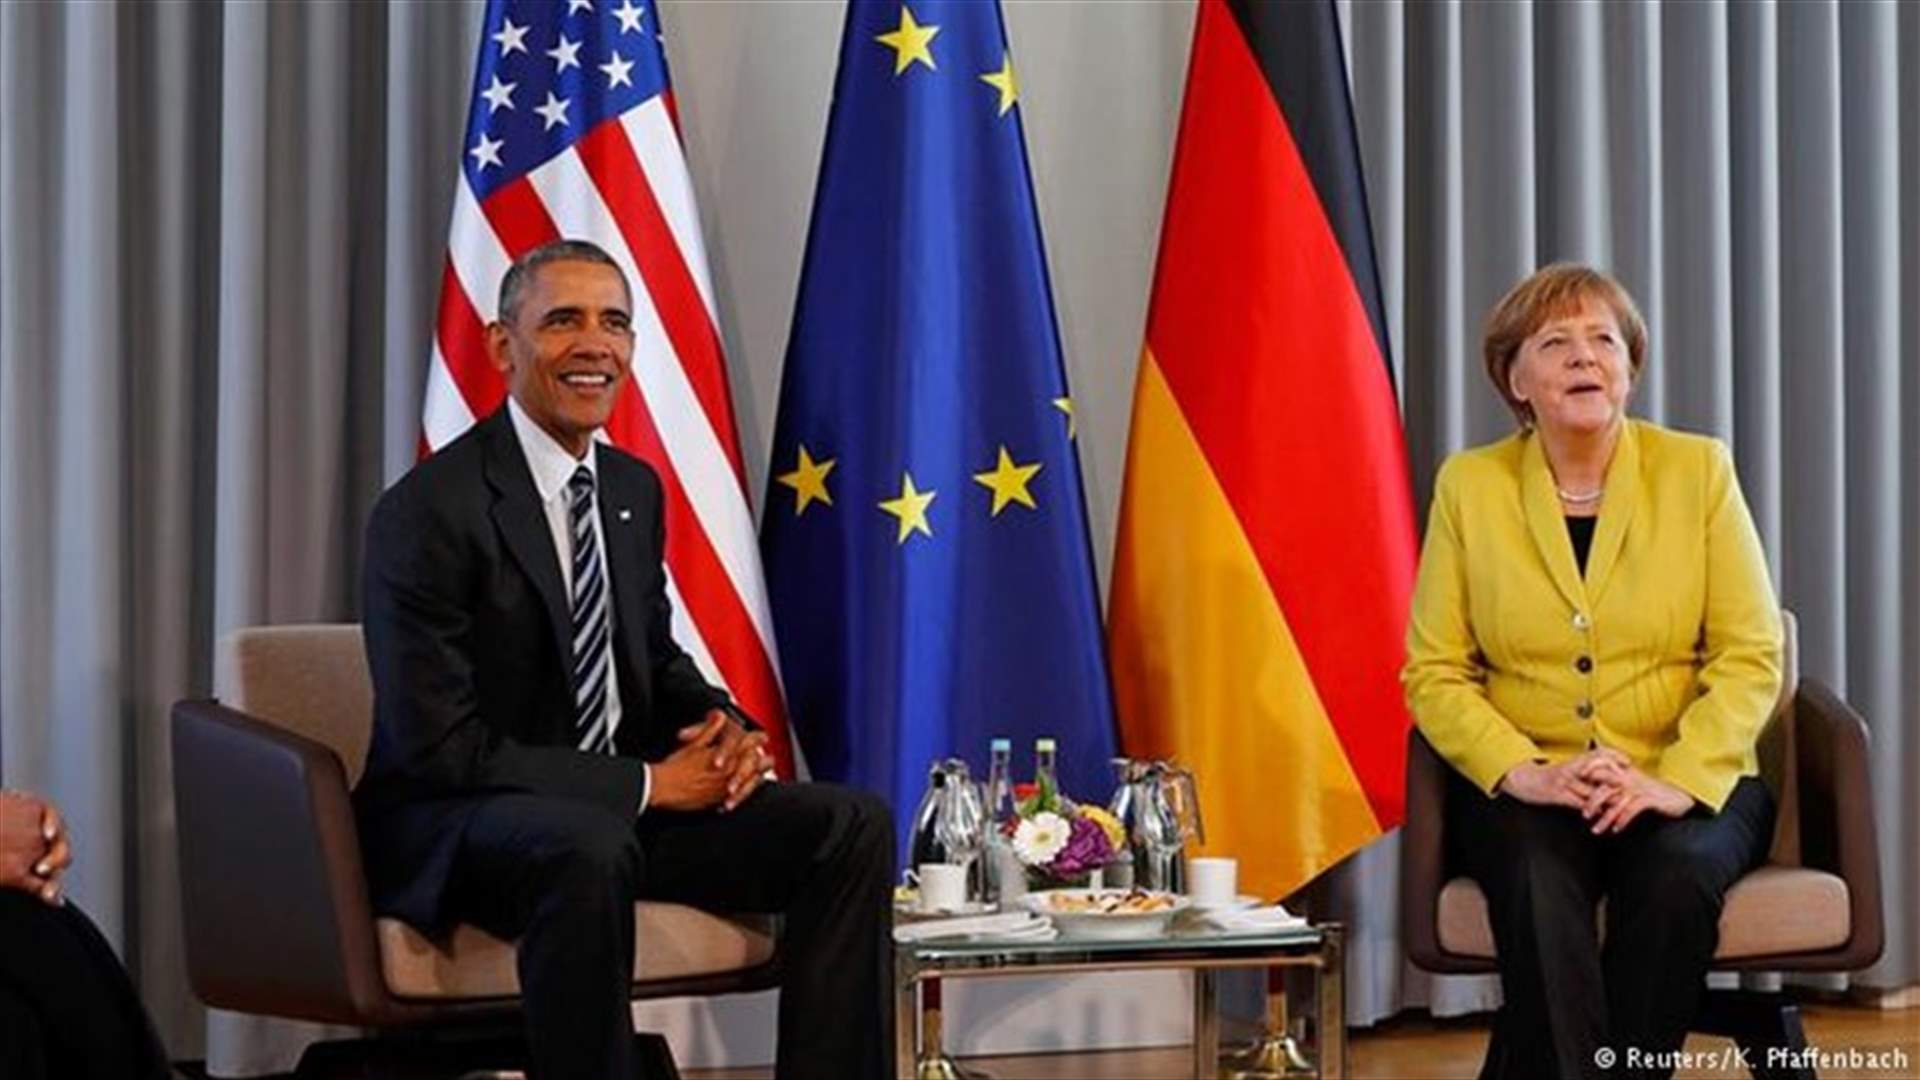 Obama says Merkel is on &quot;right side of history&quot; on refugee crisis